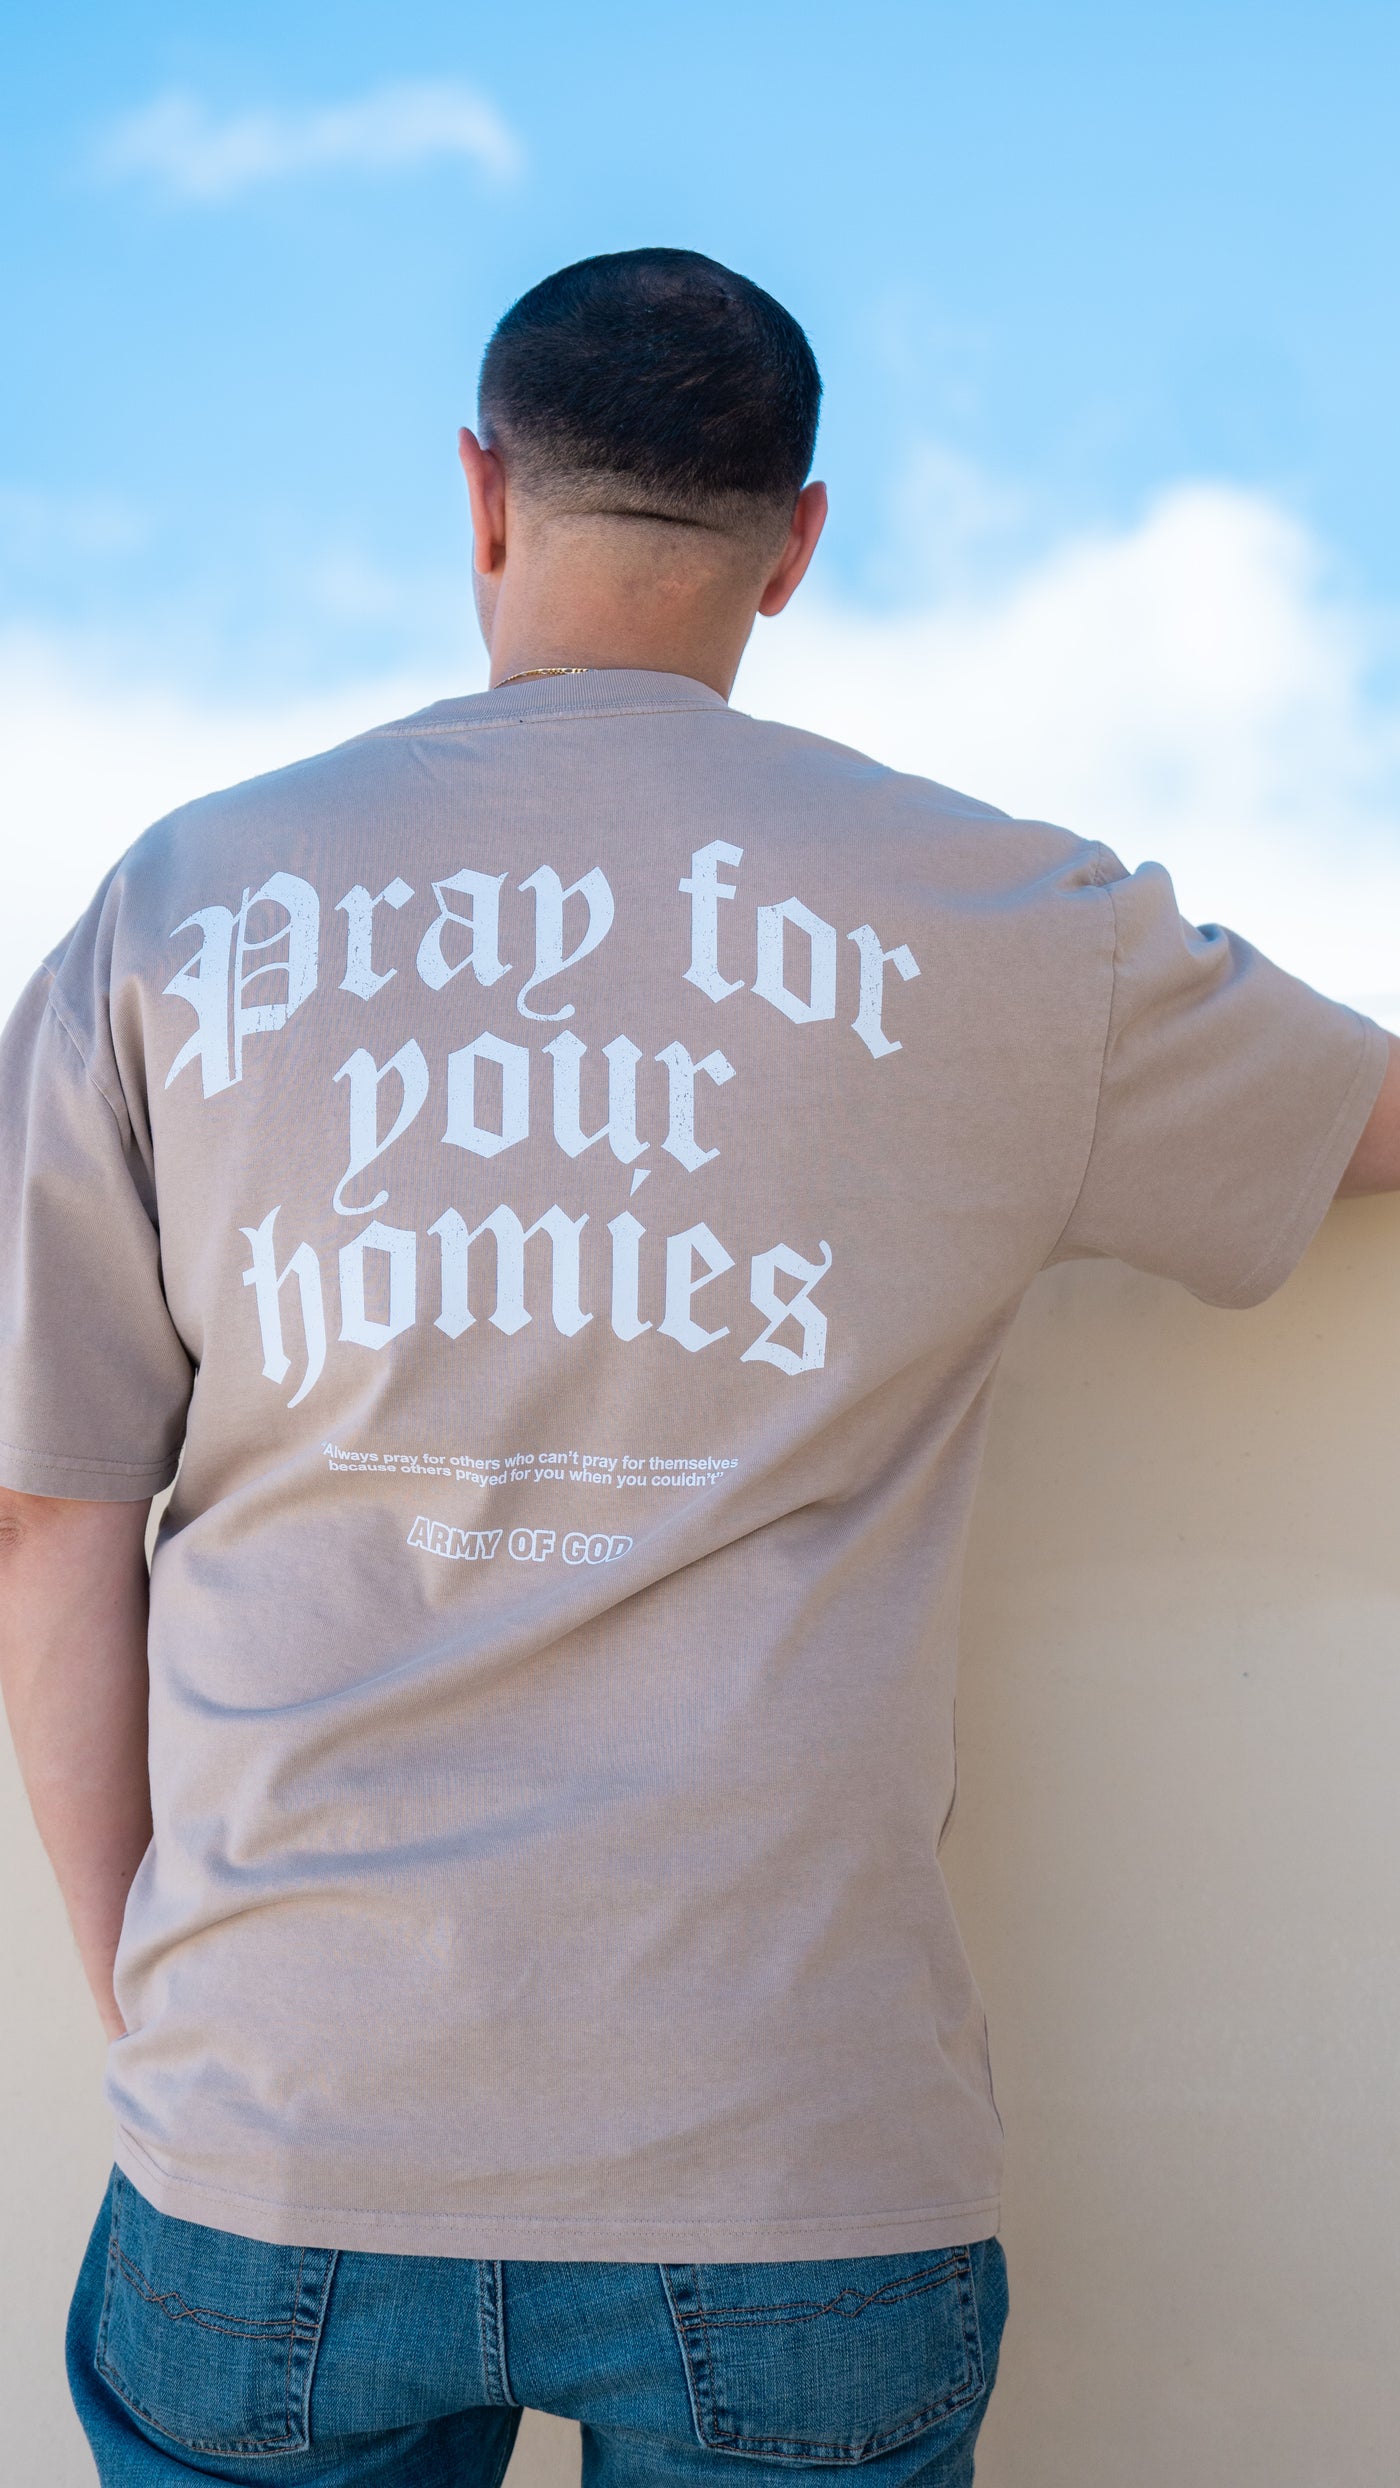 Pray for Your Homies Vintage Tee - Faded Khaki